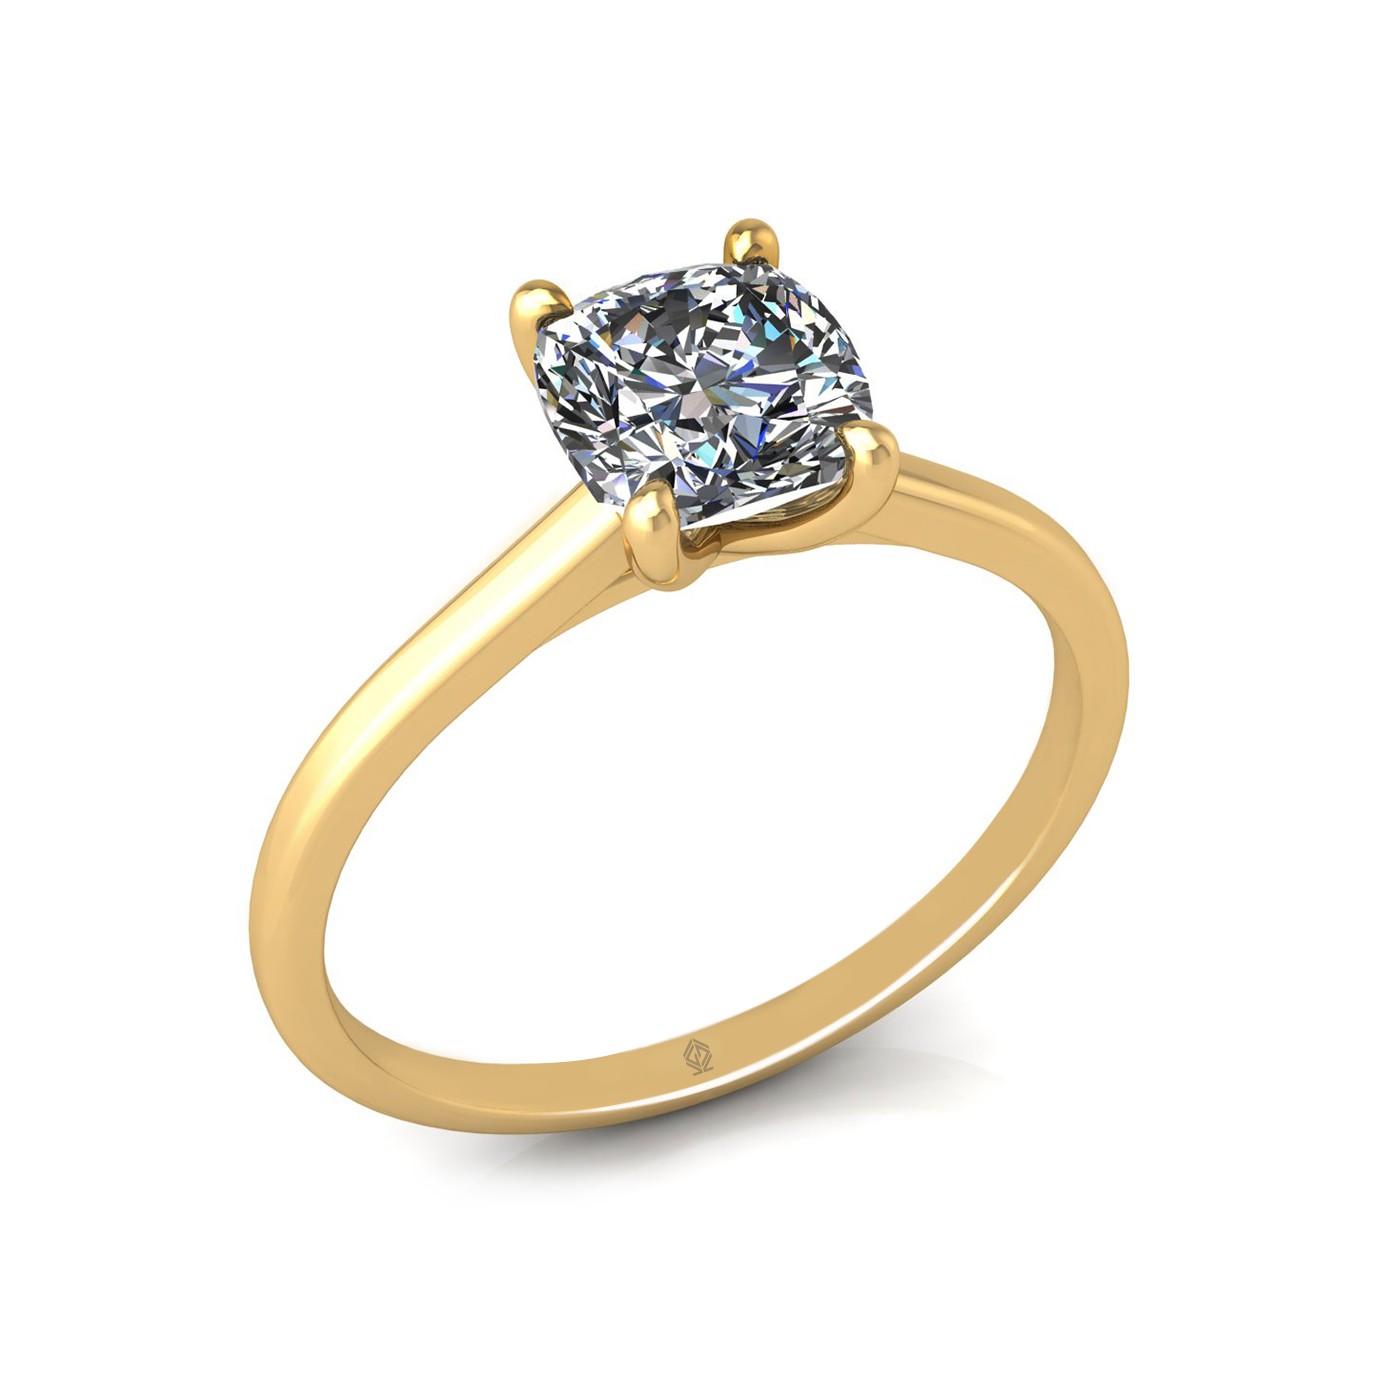 18k yellow gold 1.2ct 4 prongs solitaire cushion cut diamond engagement ring with whisper thin band